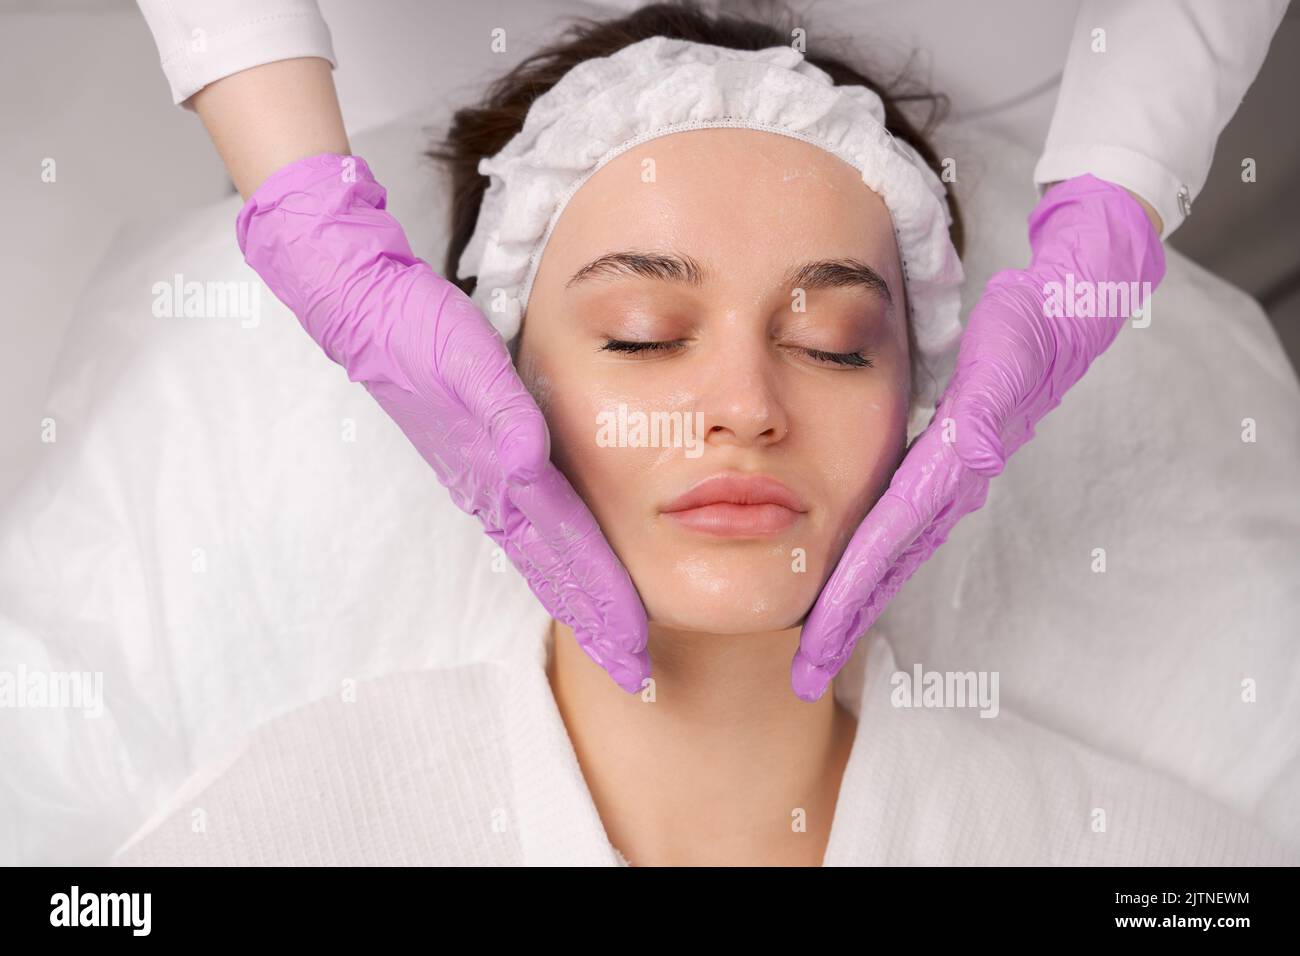 Facial massage beauty treatment. Close-up of a young woman face lying on back, getting face lifting massage, Stock Photo